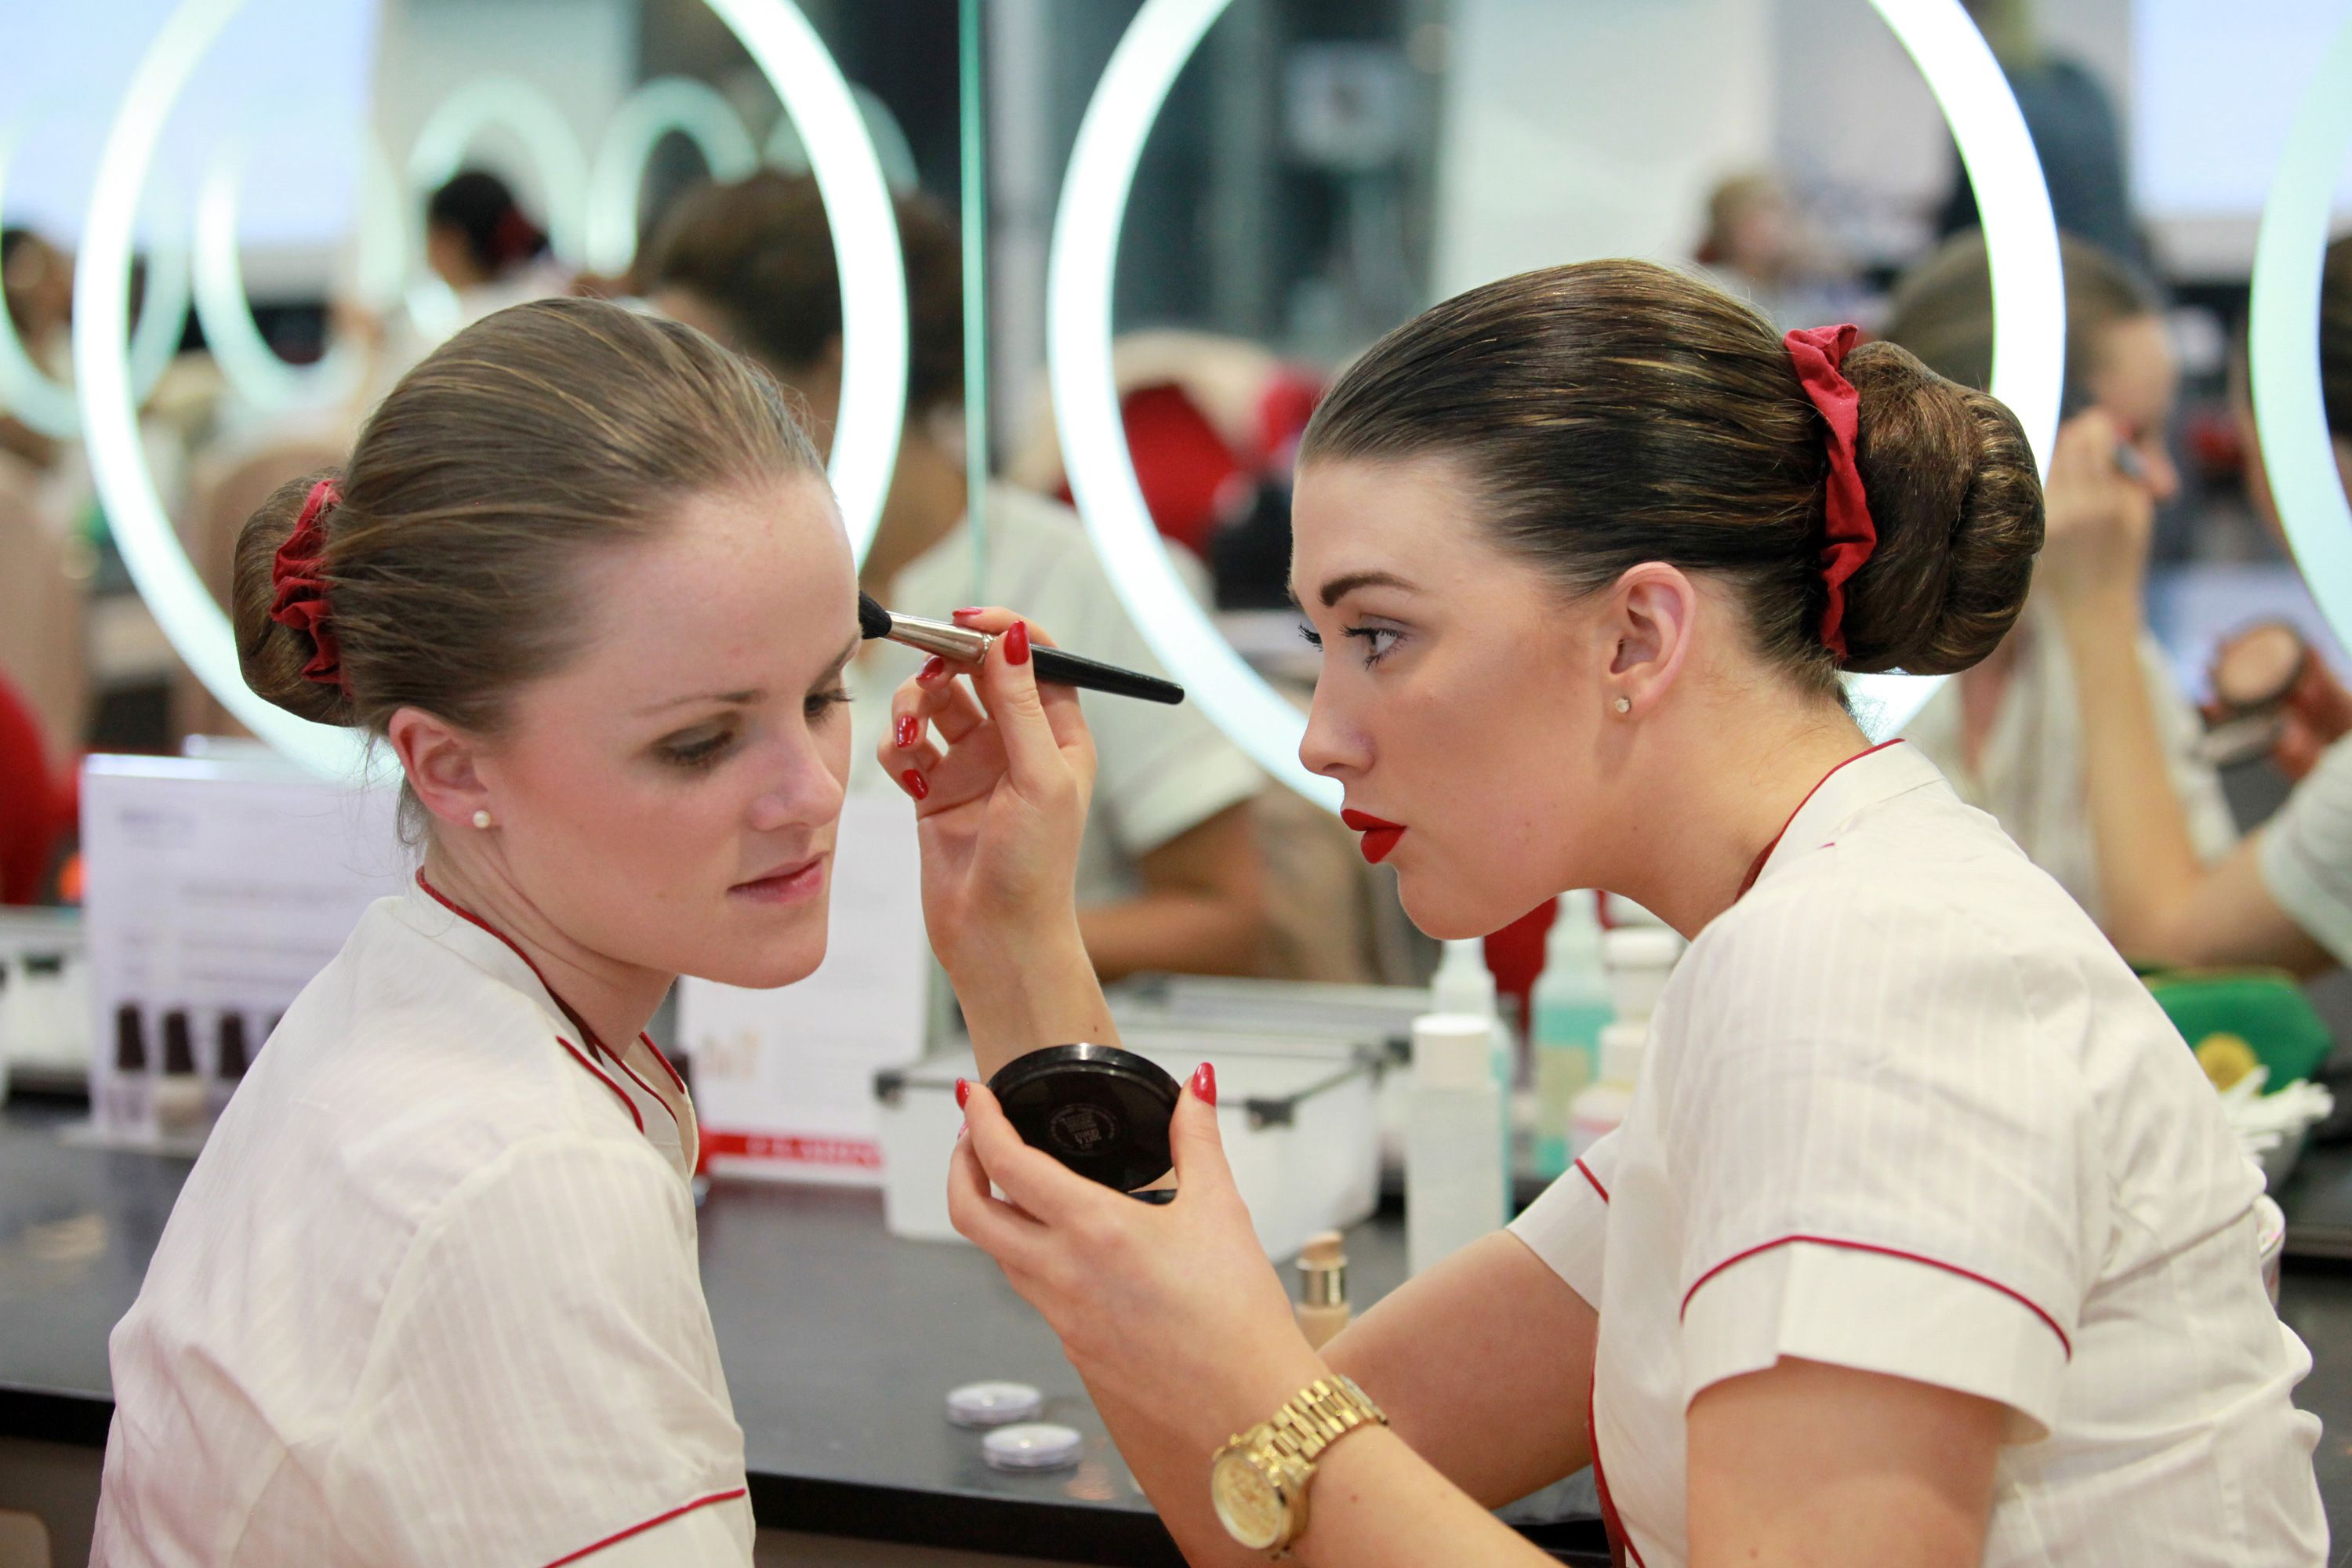 Emirates Cabin Crew Interview  How Do You Become a First Class Flight  Attendant